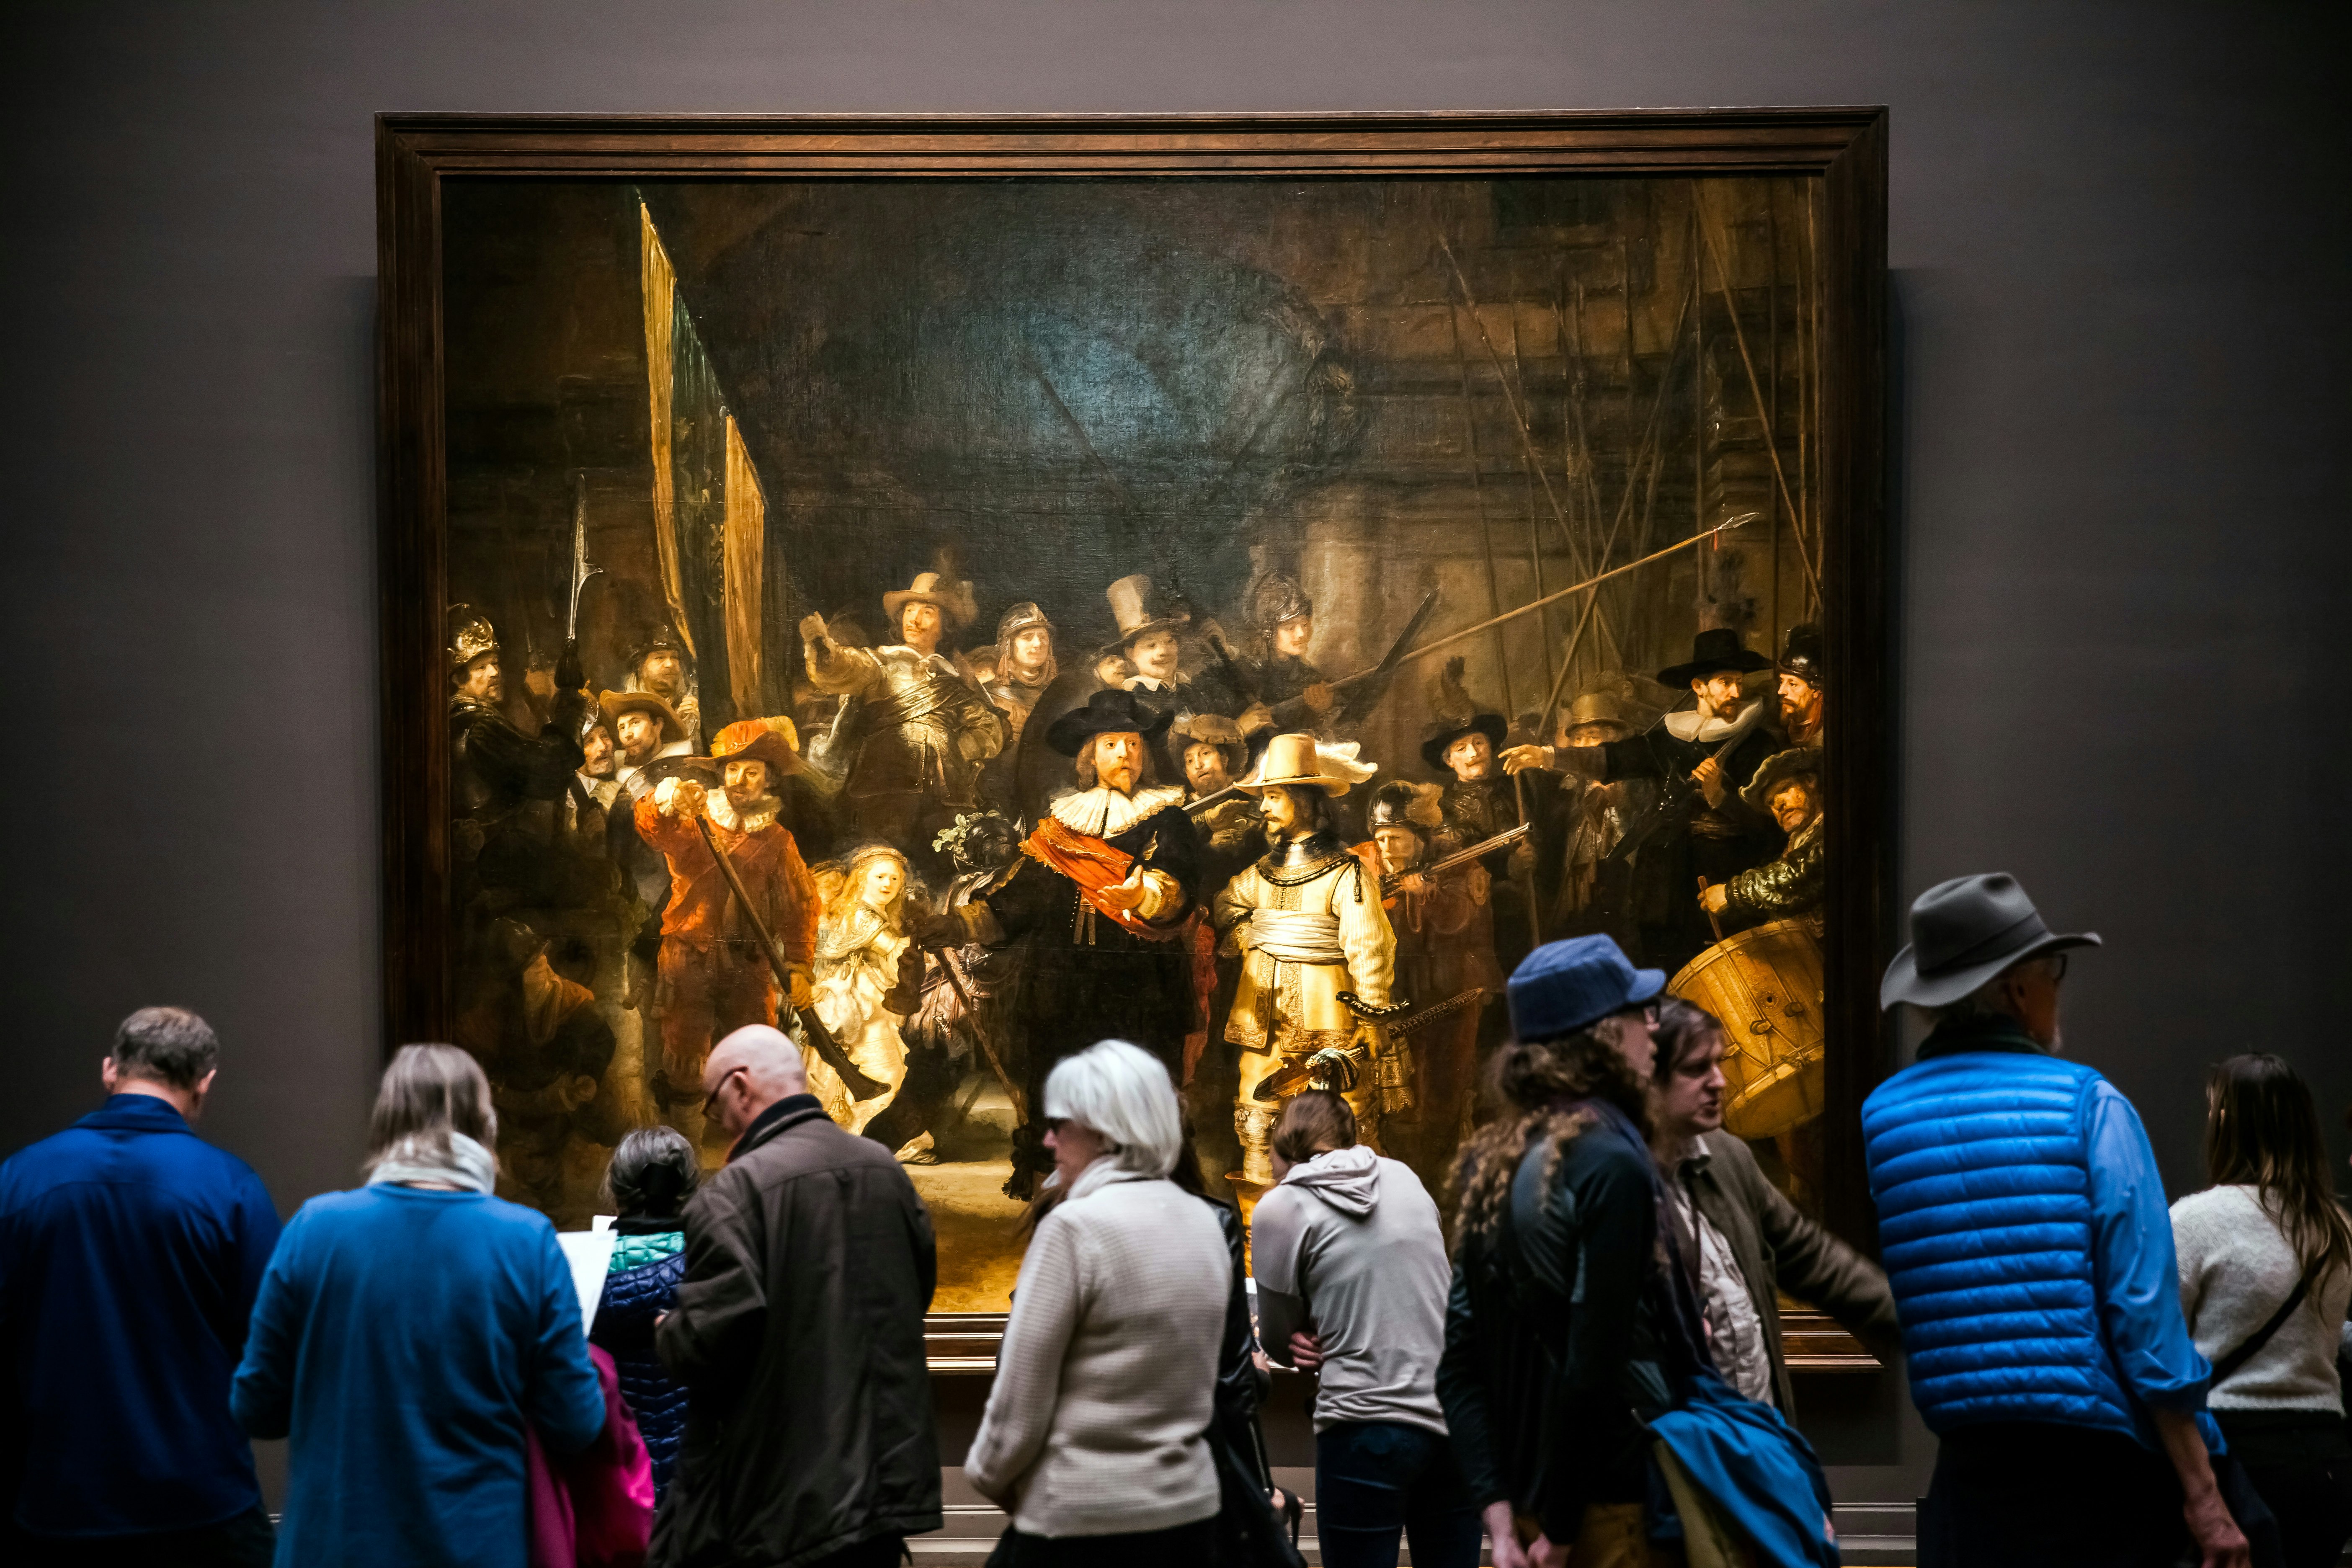 A group of people stand in front of 'The Night Watch', a large, famous painting by Rembrandt, hanging in a grand frame.